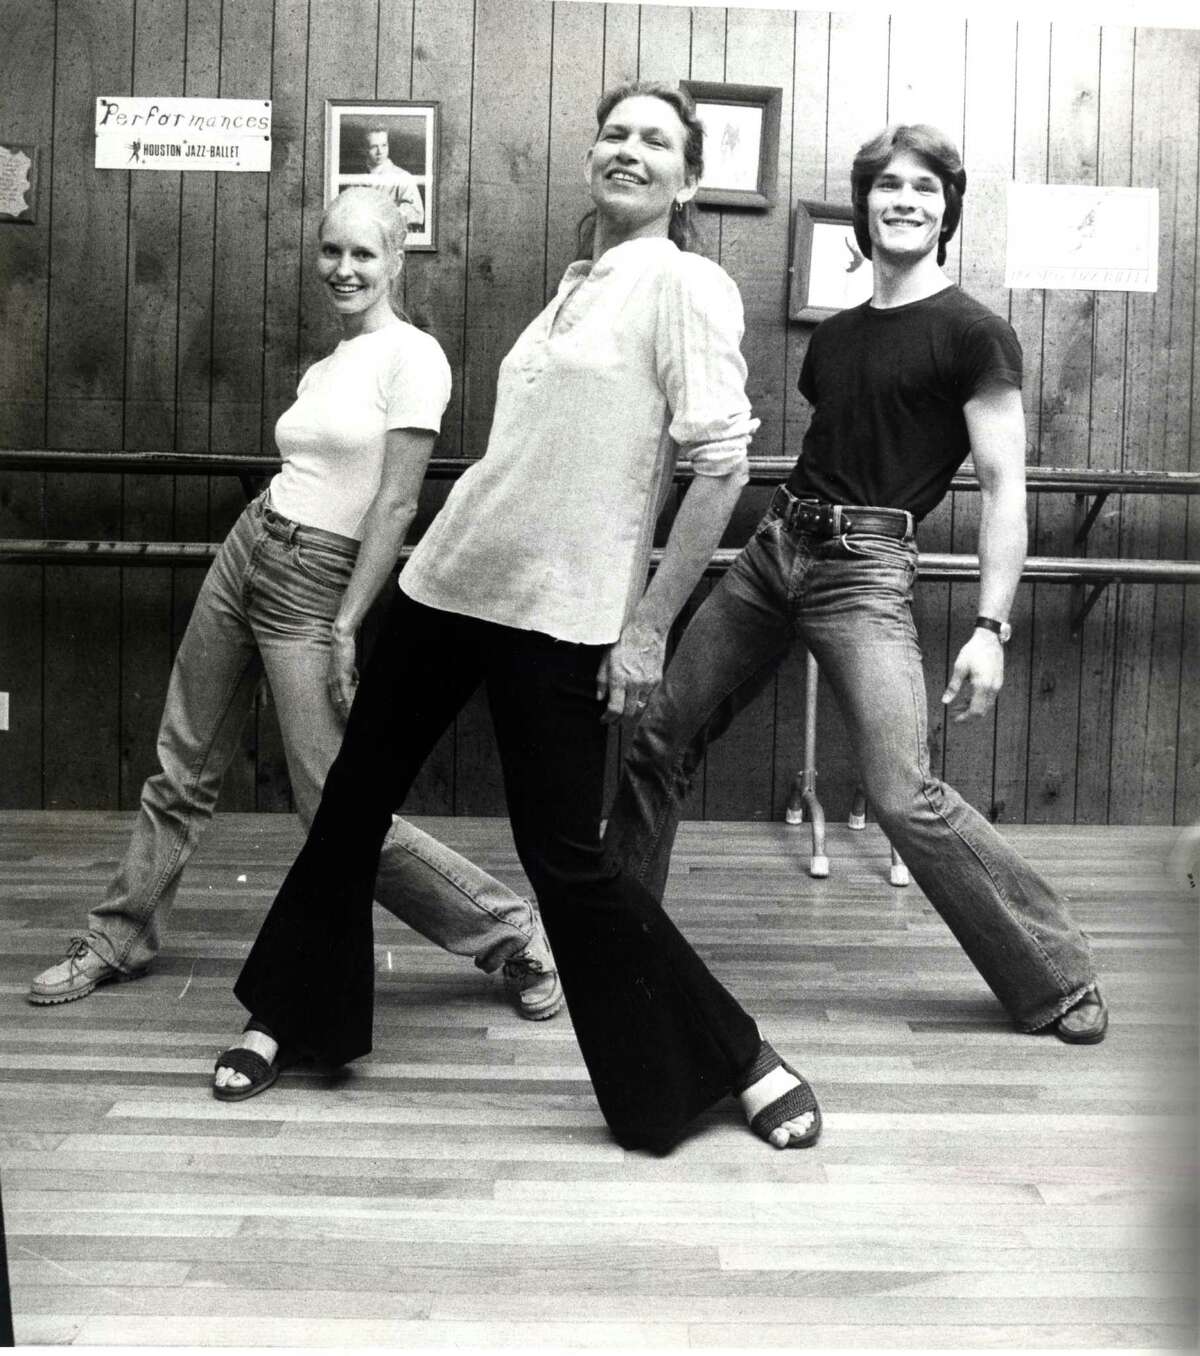 Patsy Swayze, center, taught her son Patrick Swayze and his wife Lisa Haapaniemi (aka Niemi) to dance at her studio in Houston. The three are shown in a 1978 photo.